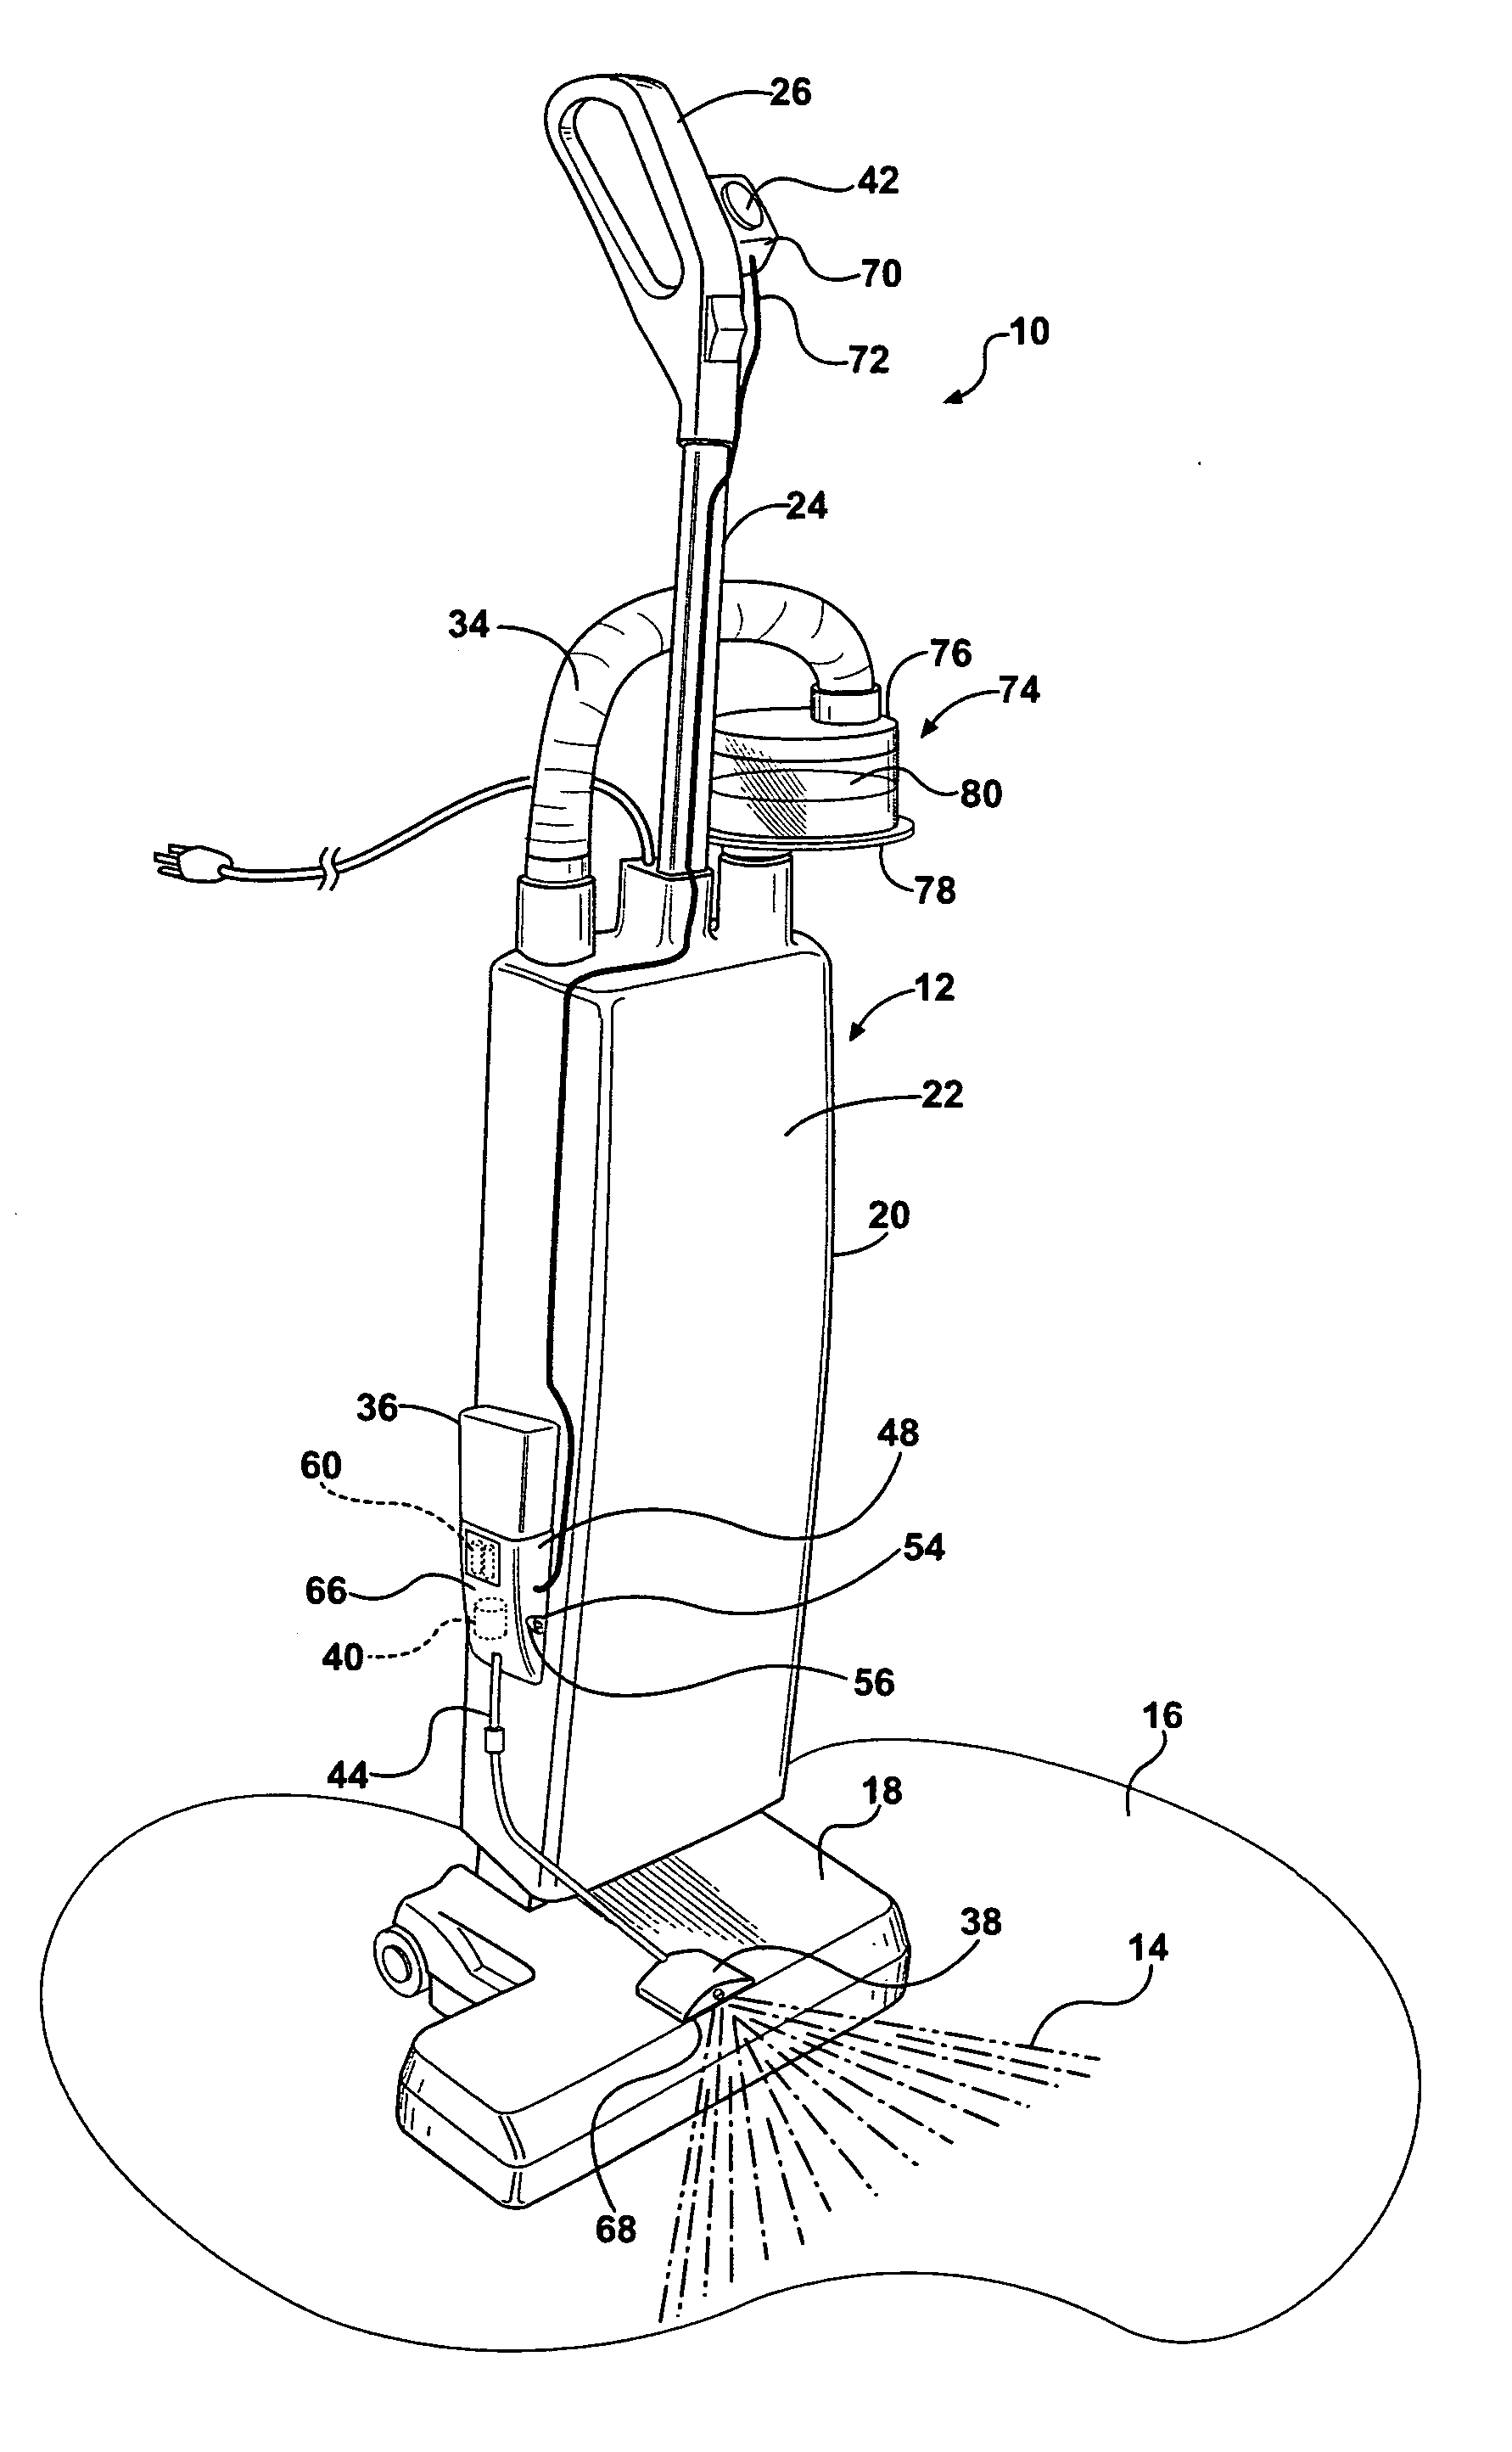 Carpet cleaning apparatus and method of construction